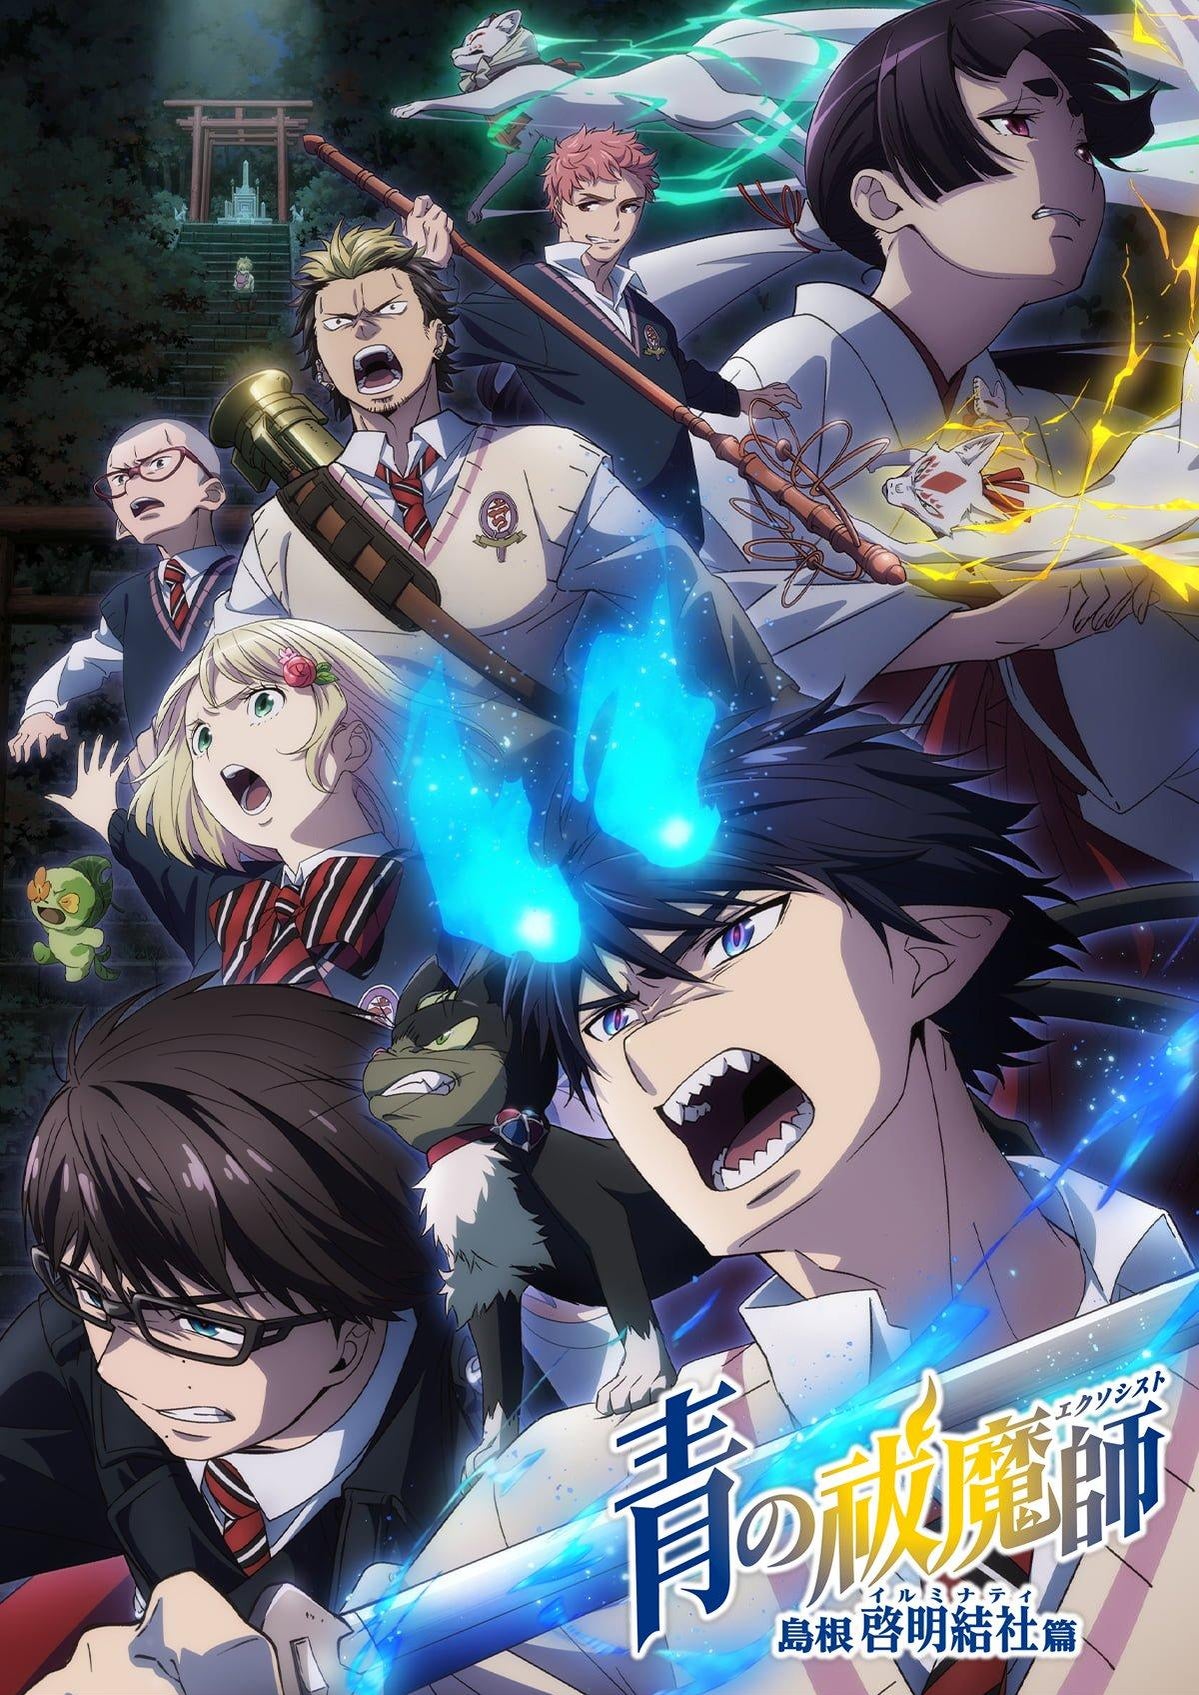 Blue Exorcist Season 3 Confirms Release Date With New Trailer